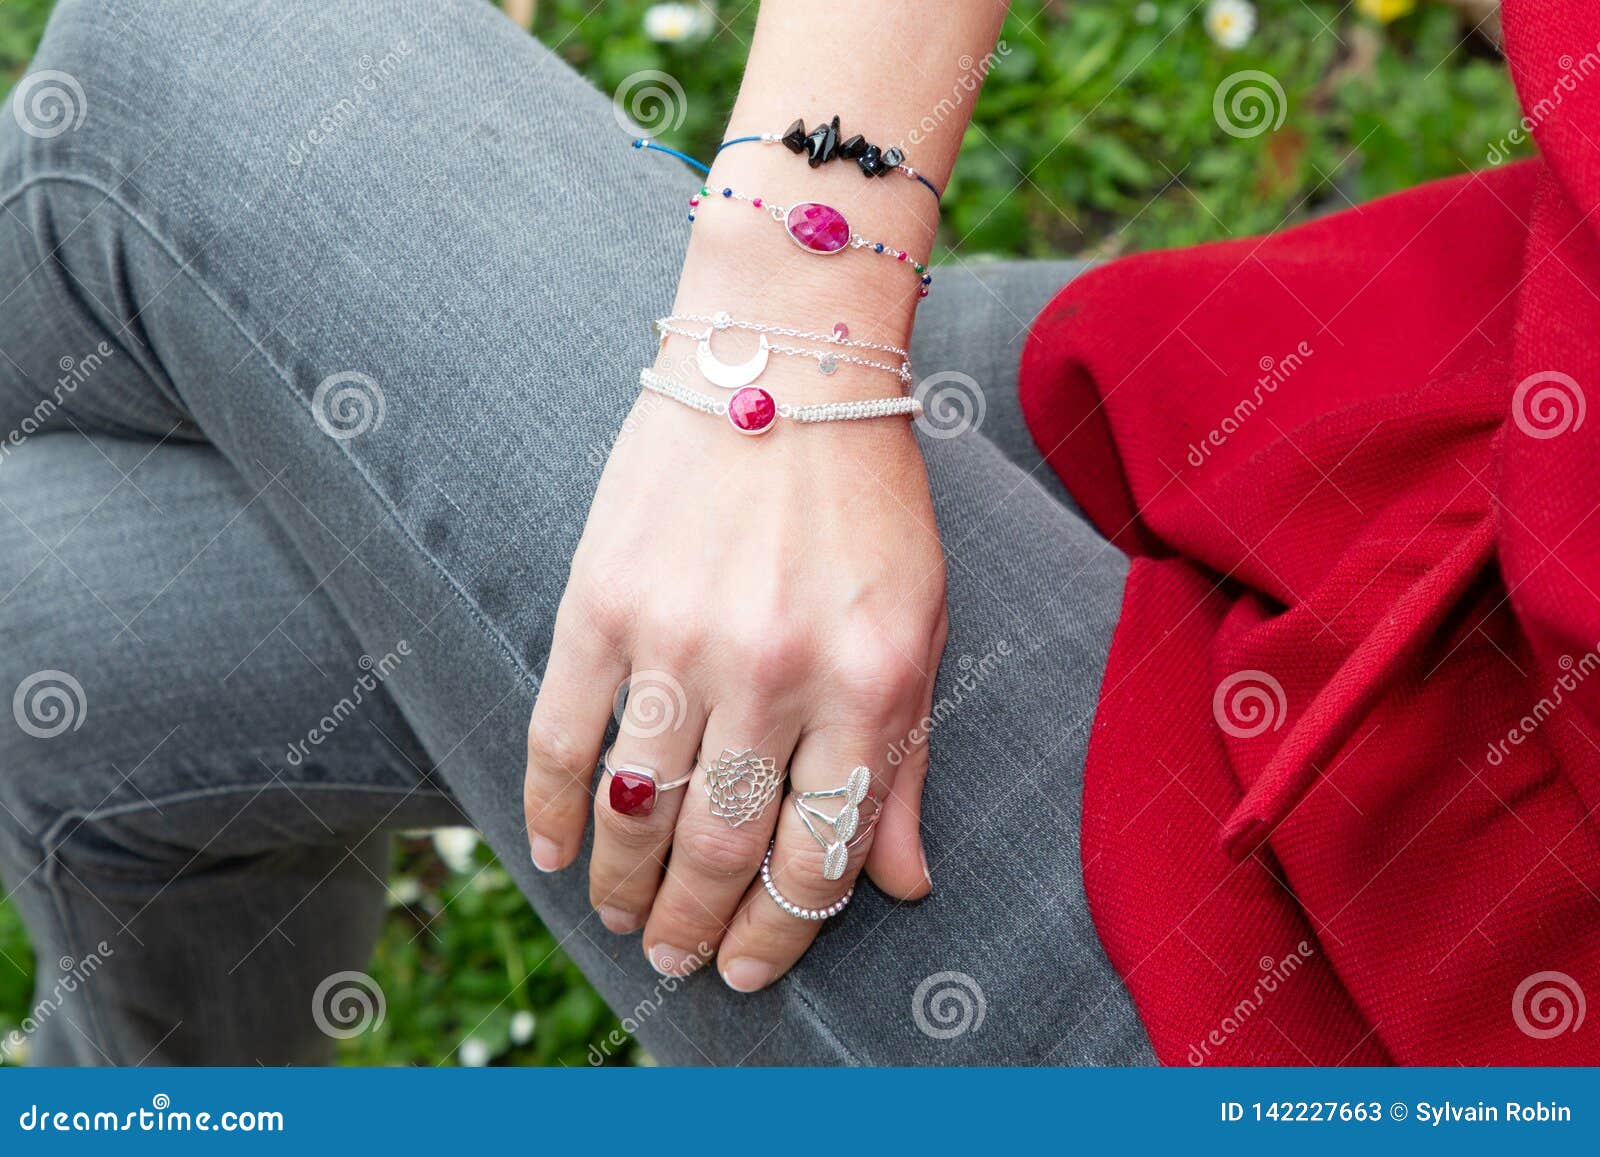 Forearms Detail Image with Bracelets in Hands Woman Fingers Stock Image ...